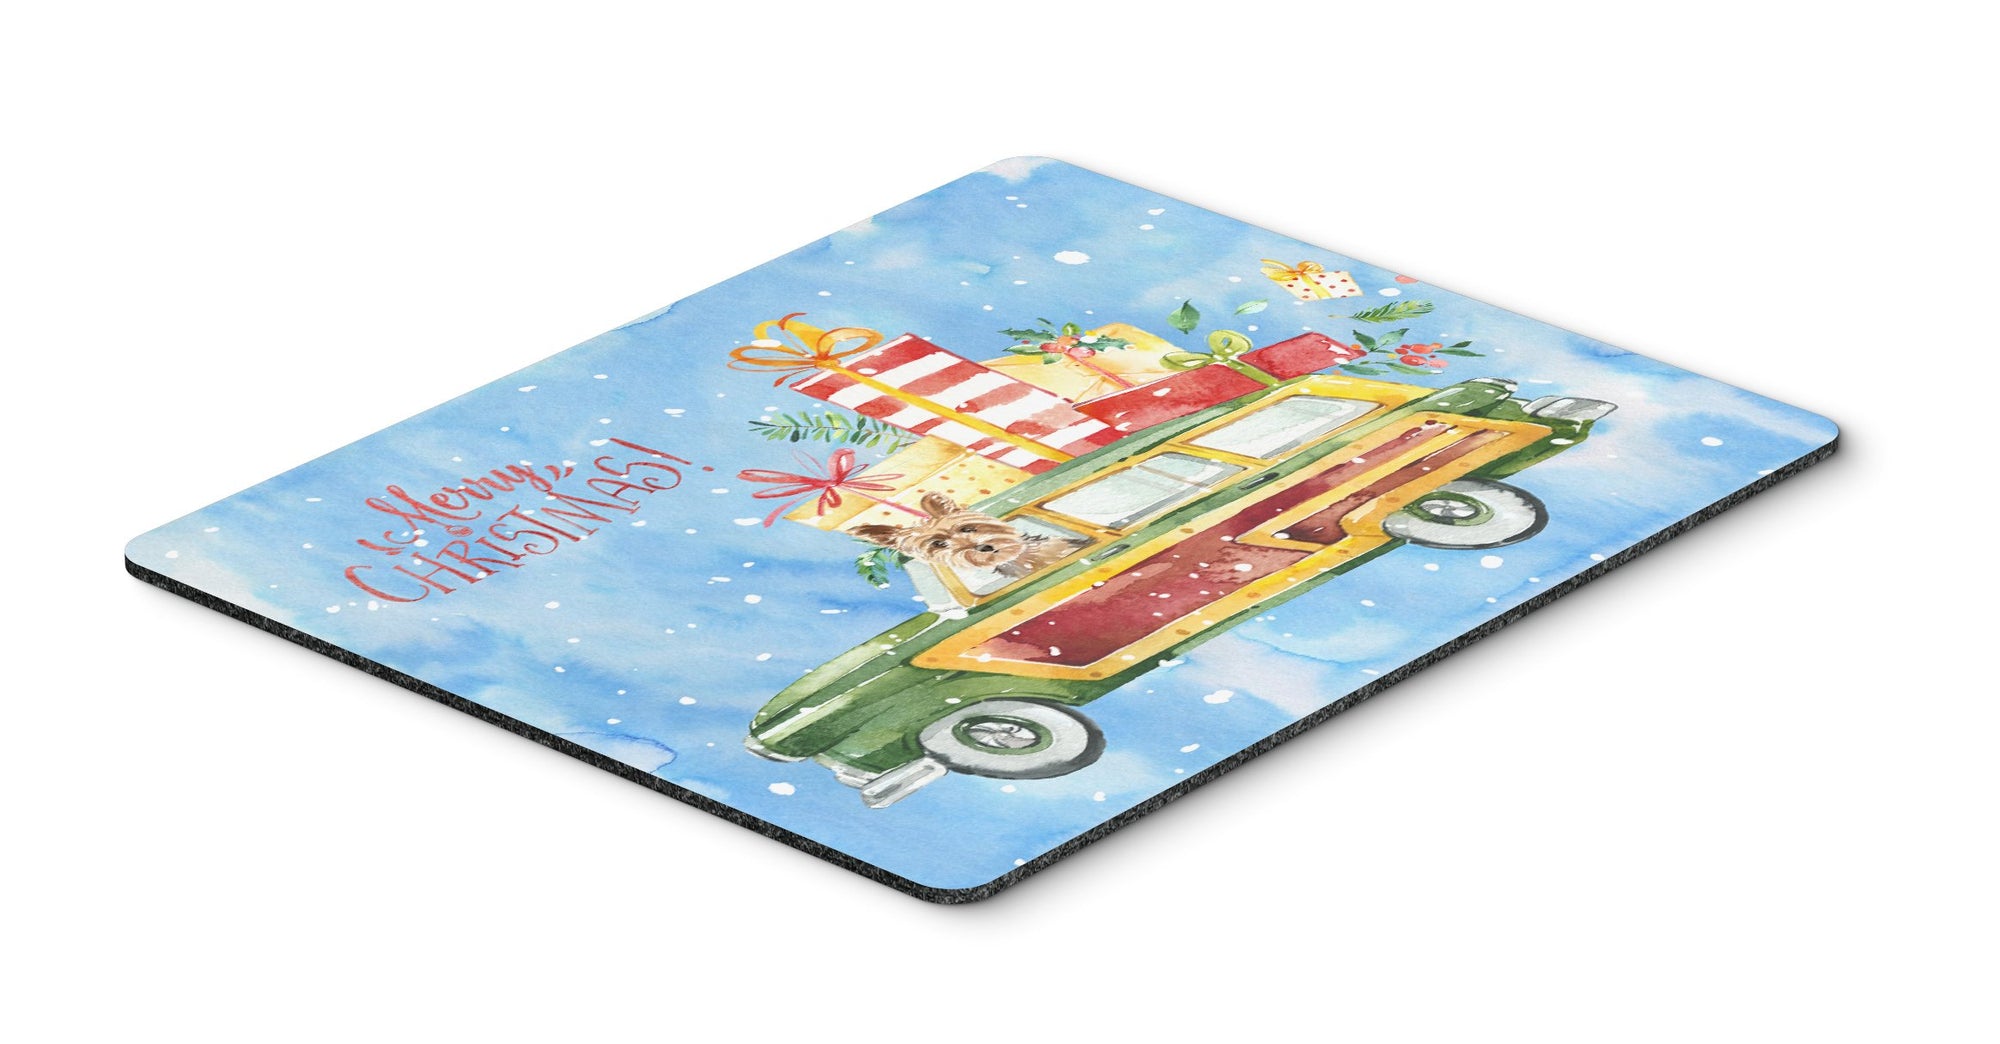 Merry Christmas Yorkshire Terrier Mouse Pad, Hot Pad or Trivet CK2431MP by Caroline's Treasures